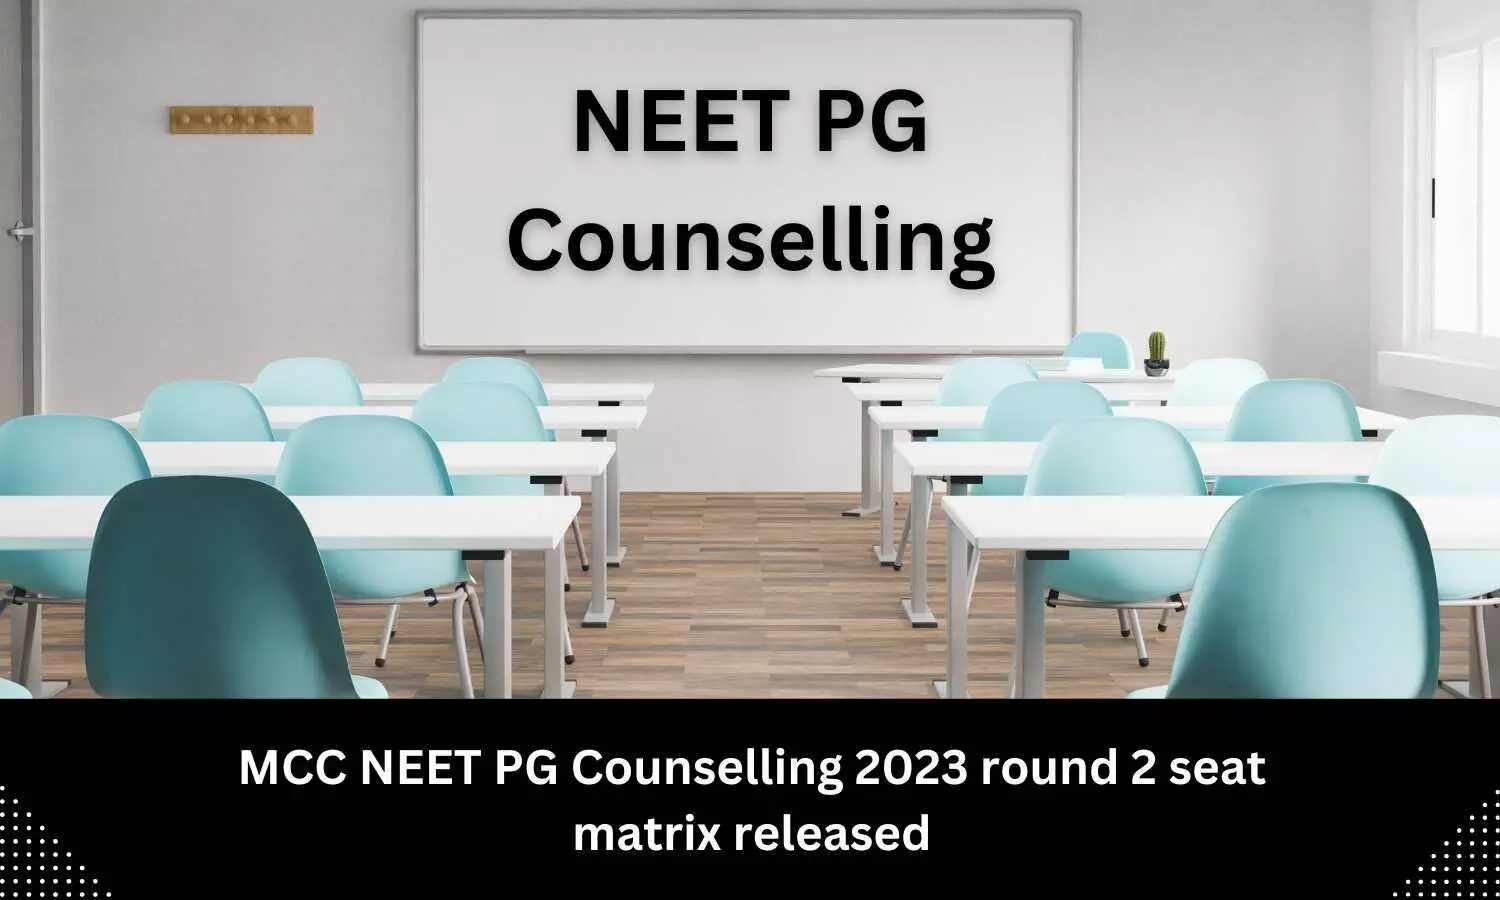 MCC releases seat matrix of Round 2 NEET PG Counselling 2023